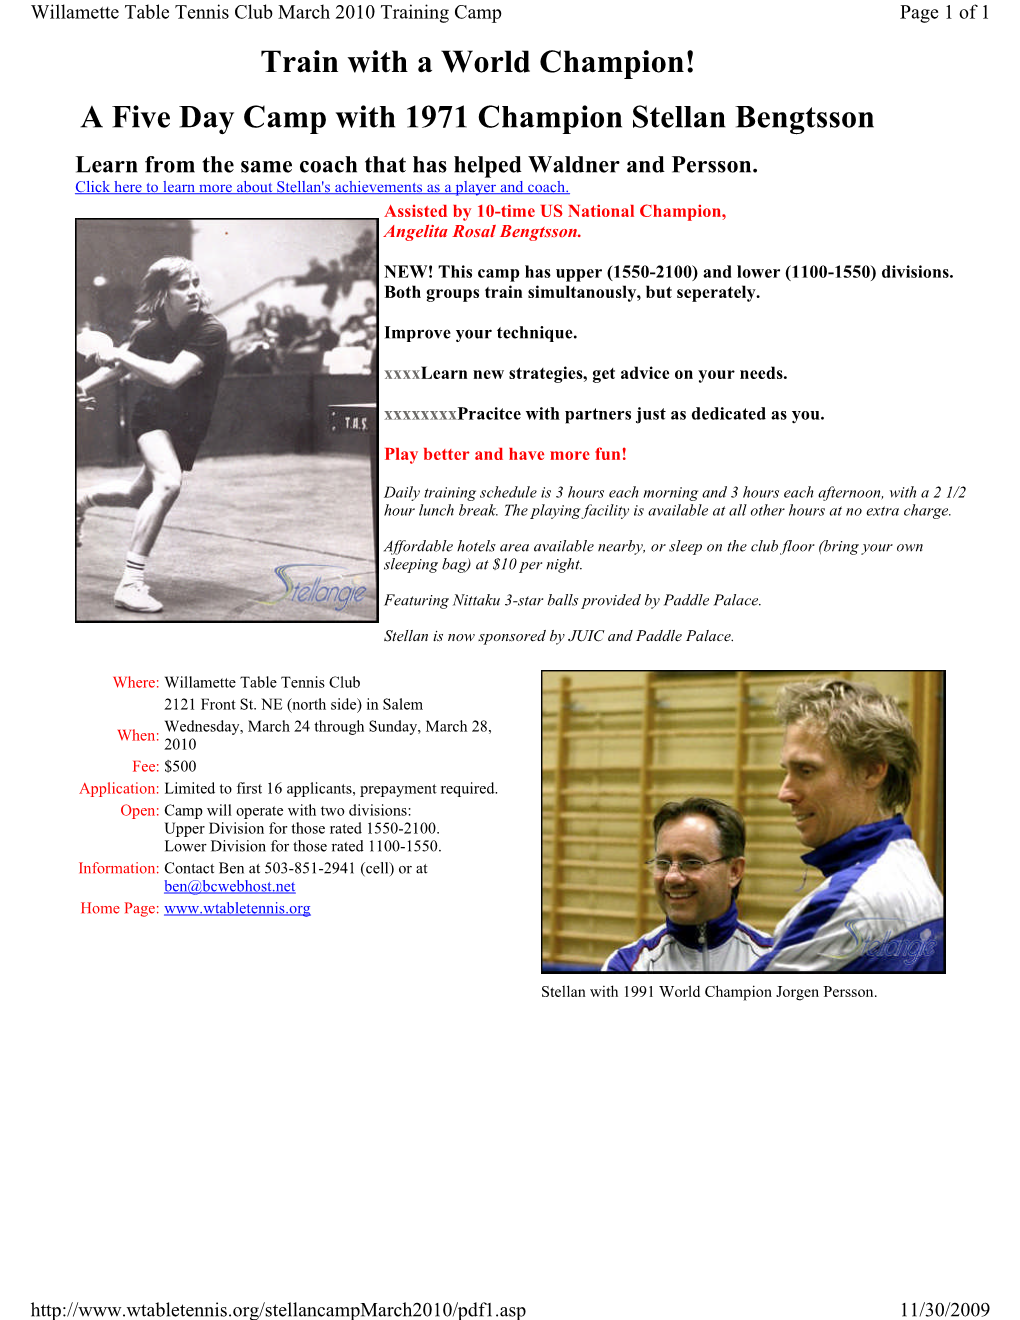 A Five Day Camp with 1971 Champion Stellan Bengtsson Learn from the Same Coach That Has Helped Waldner and Persson